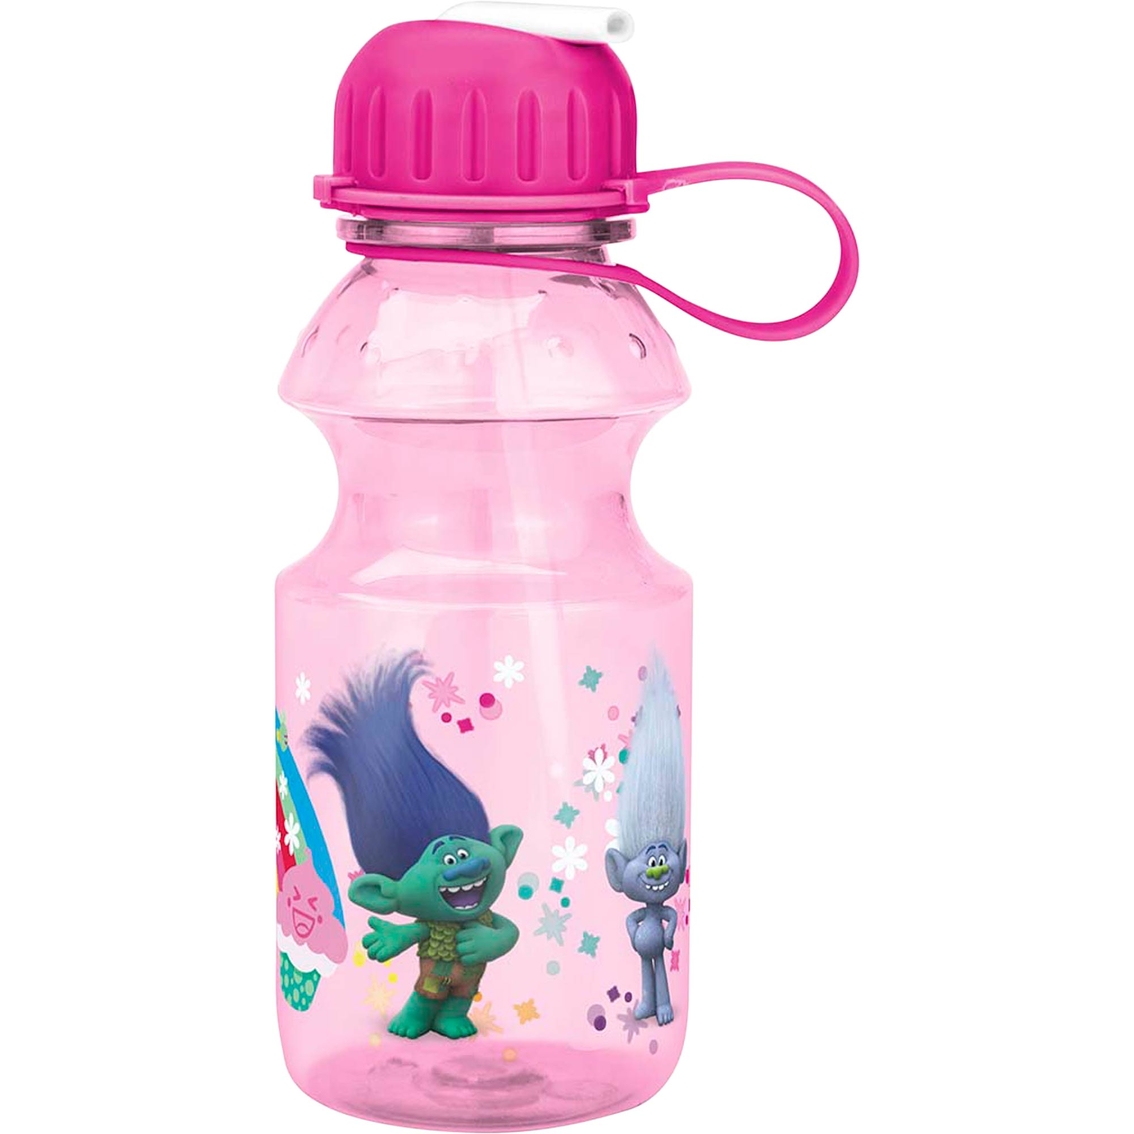 TureClos Water Bottle with Rope Lovely Cartoon Plastic Milk